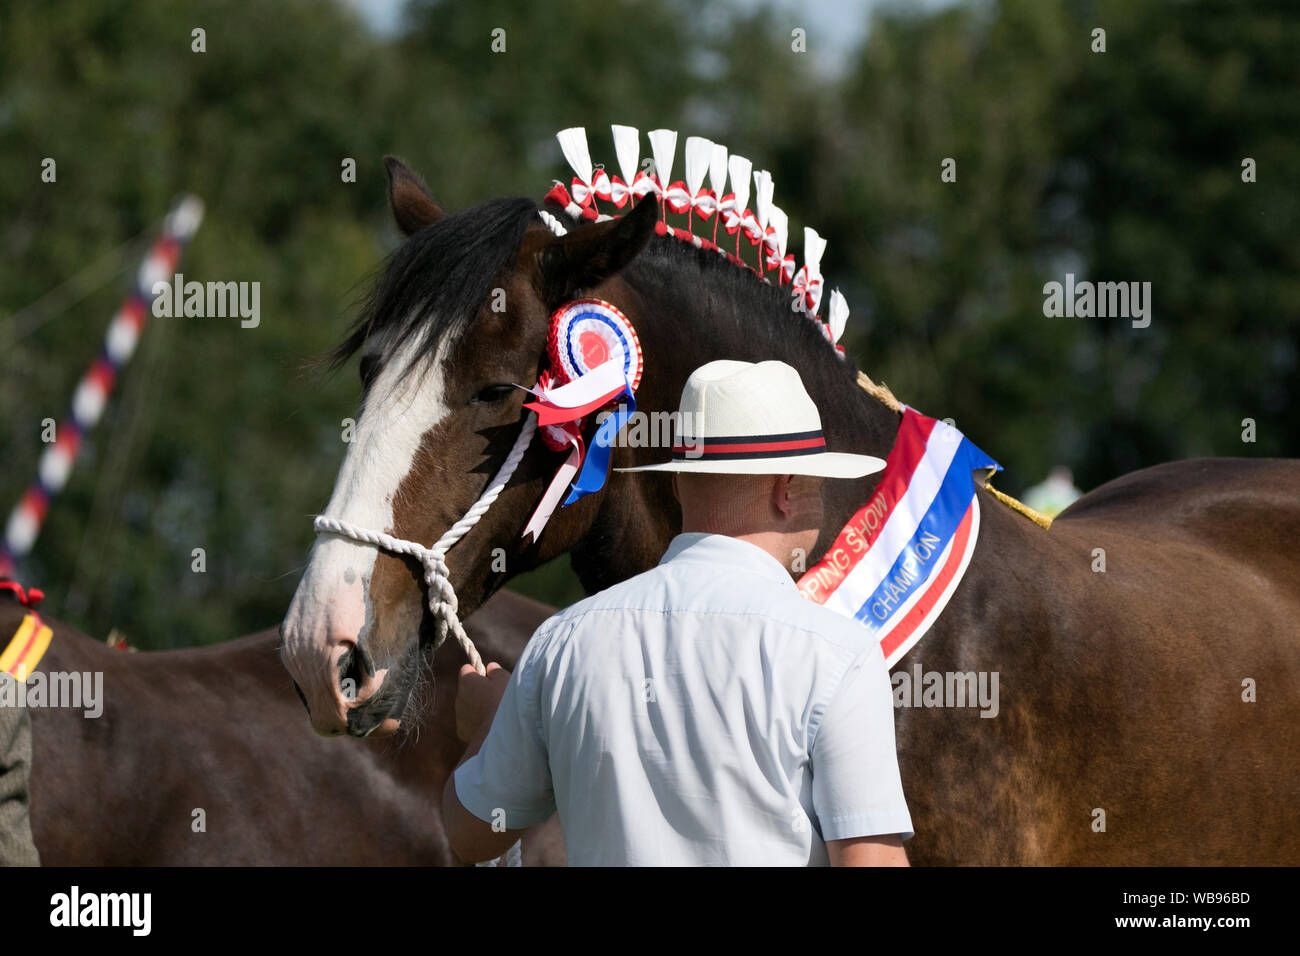 Chipping Agricultural Society 2019 in the Forest of Bowland, UK. Animal, award, rosette, ribbon, competition, symbol, winner, show, head harness. Stock Photo